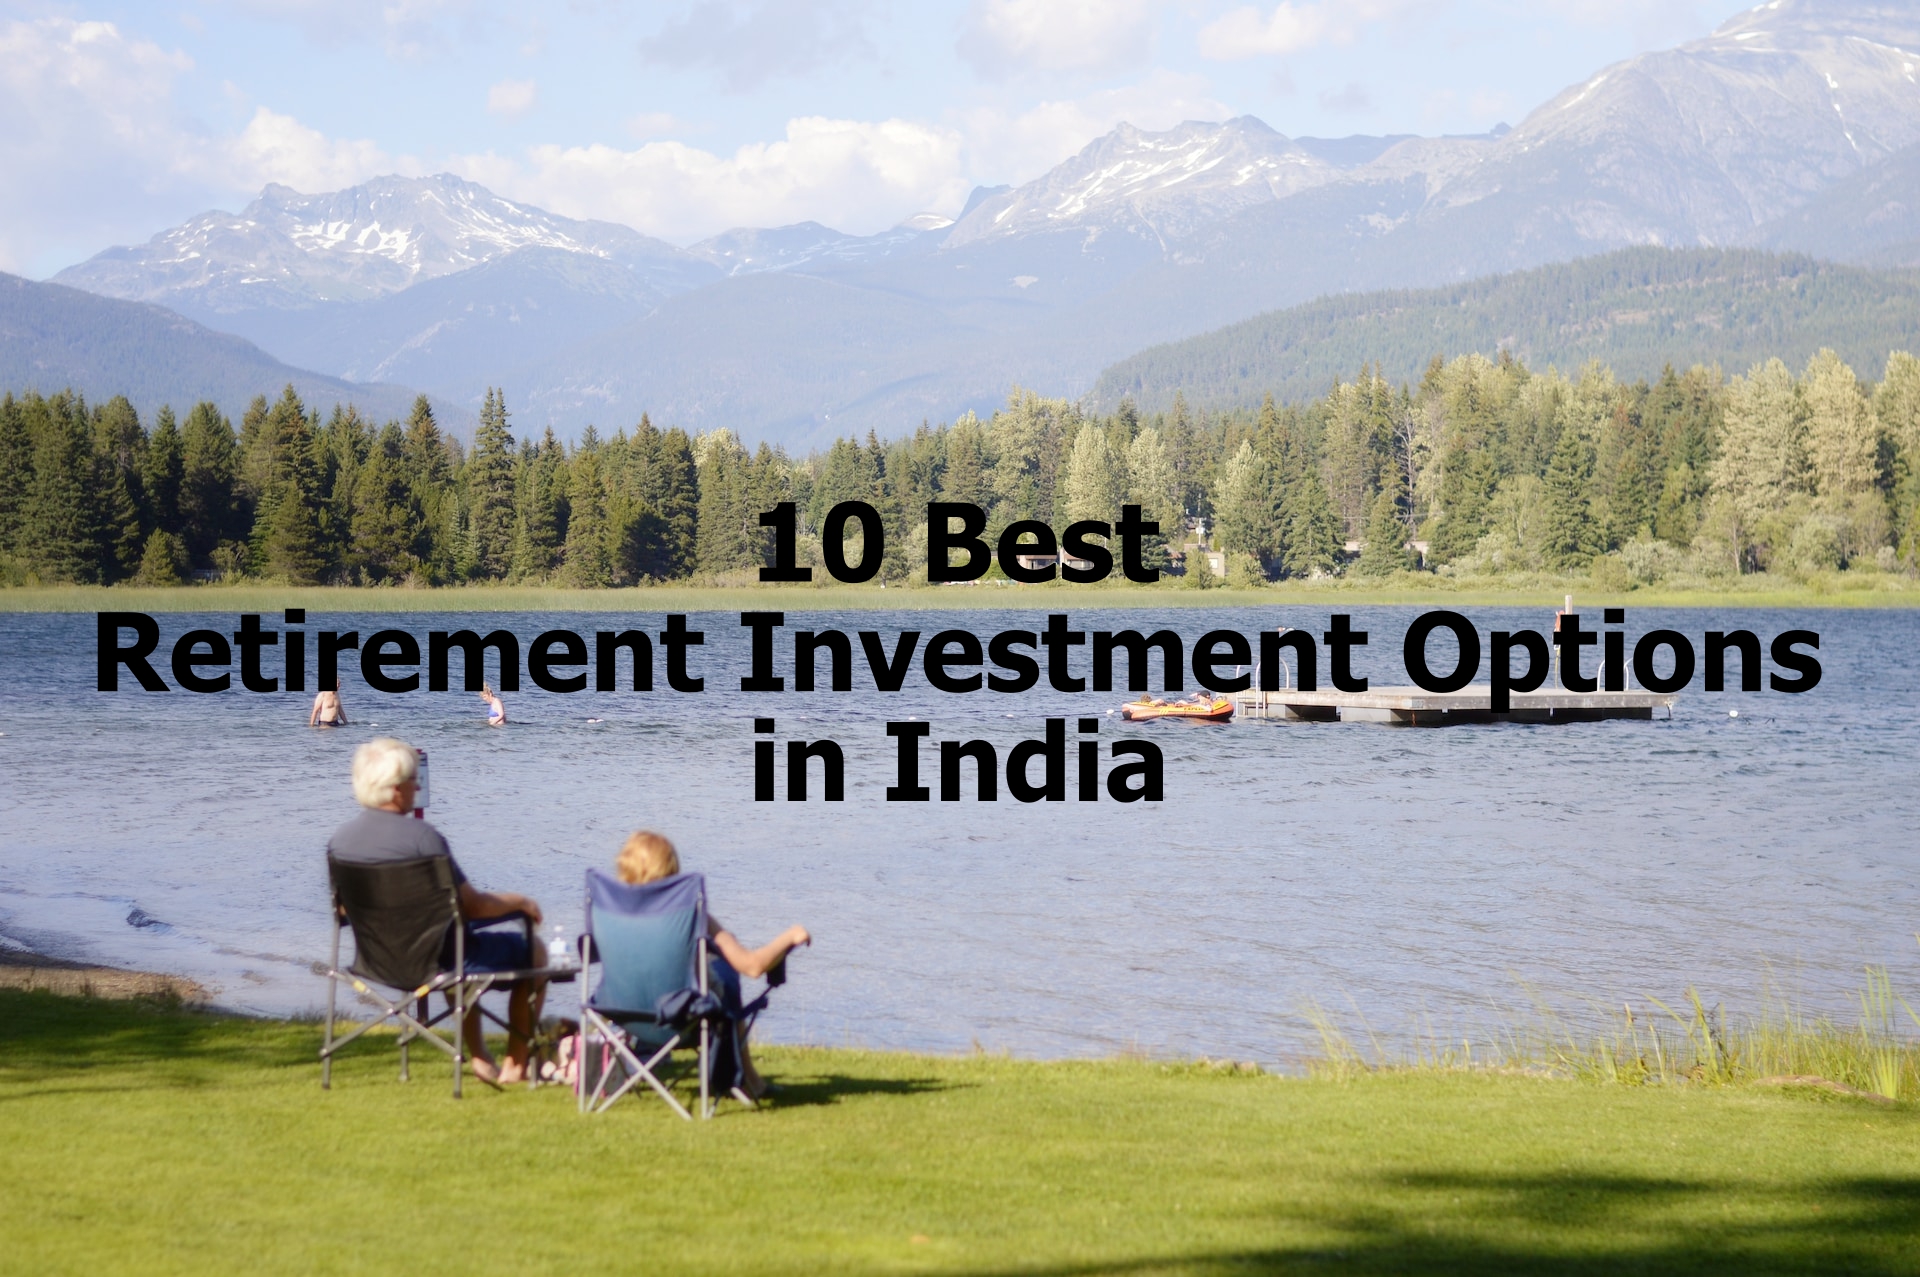 Best Retirement Investment Options in India